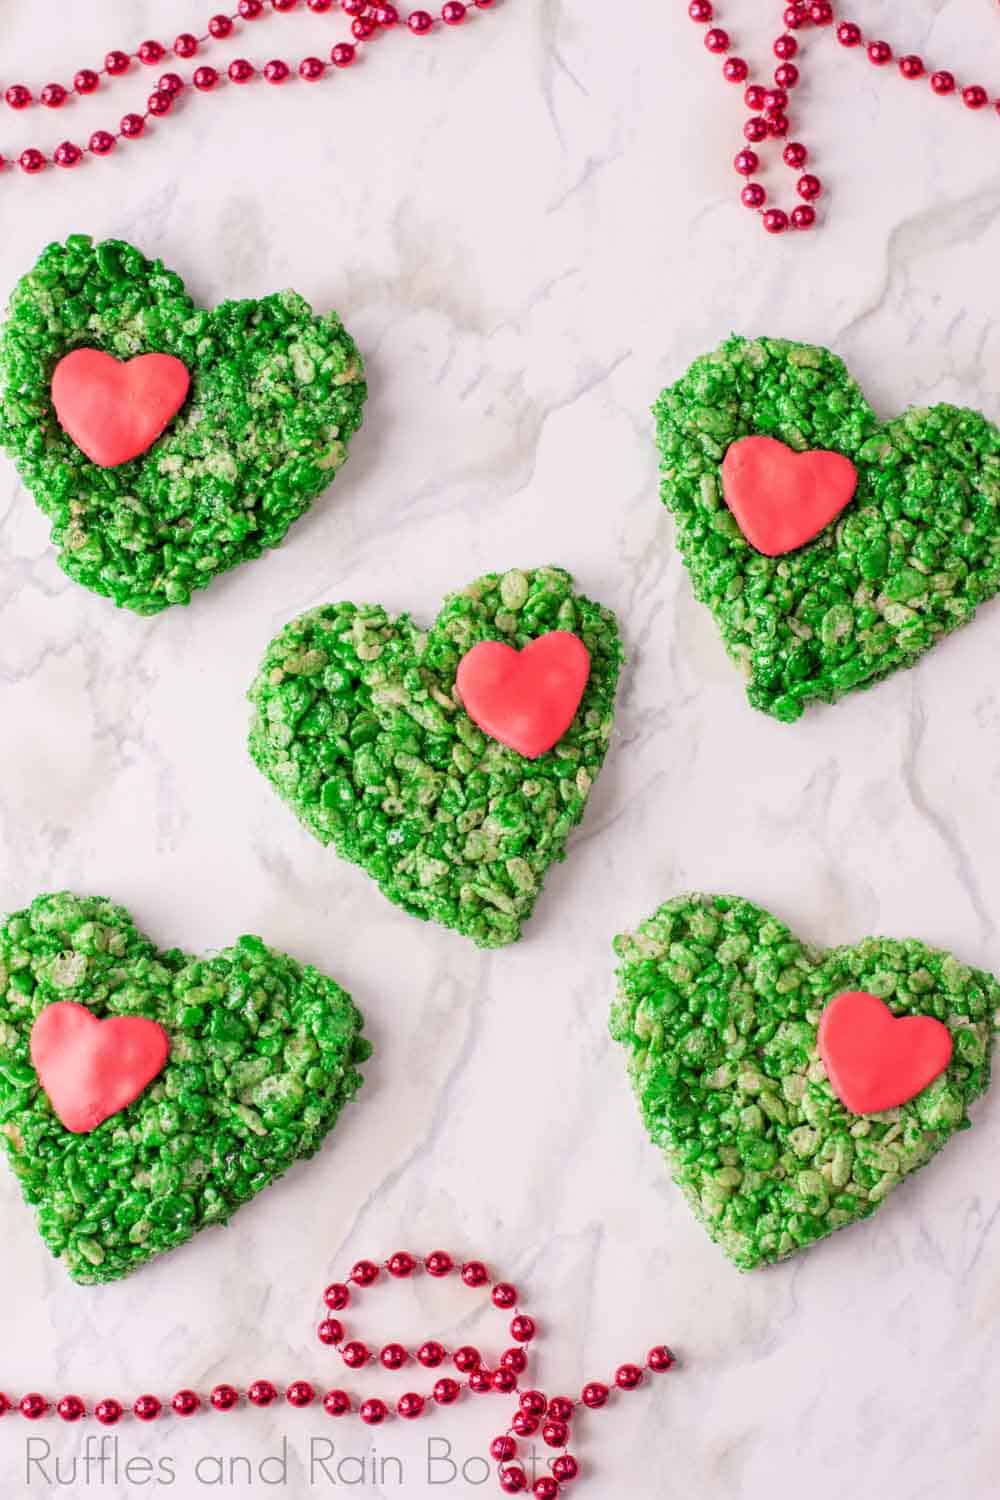 green grinch rice krispies treats with candy hearts on white marble background with red beads and no text.